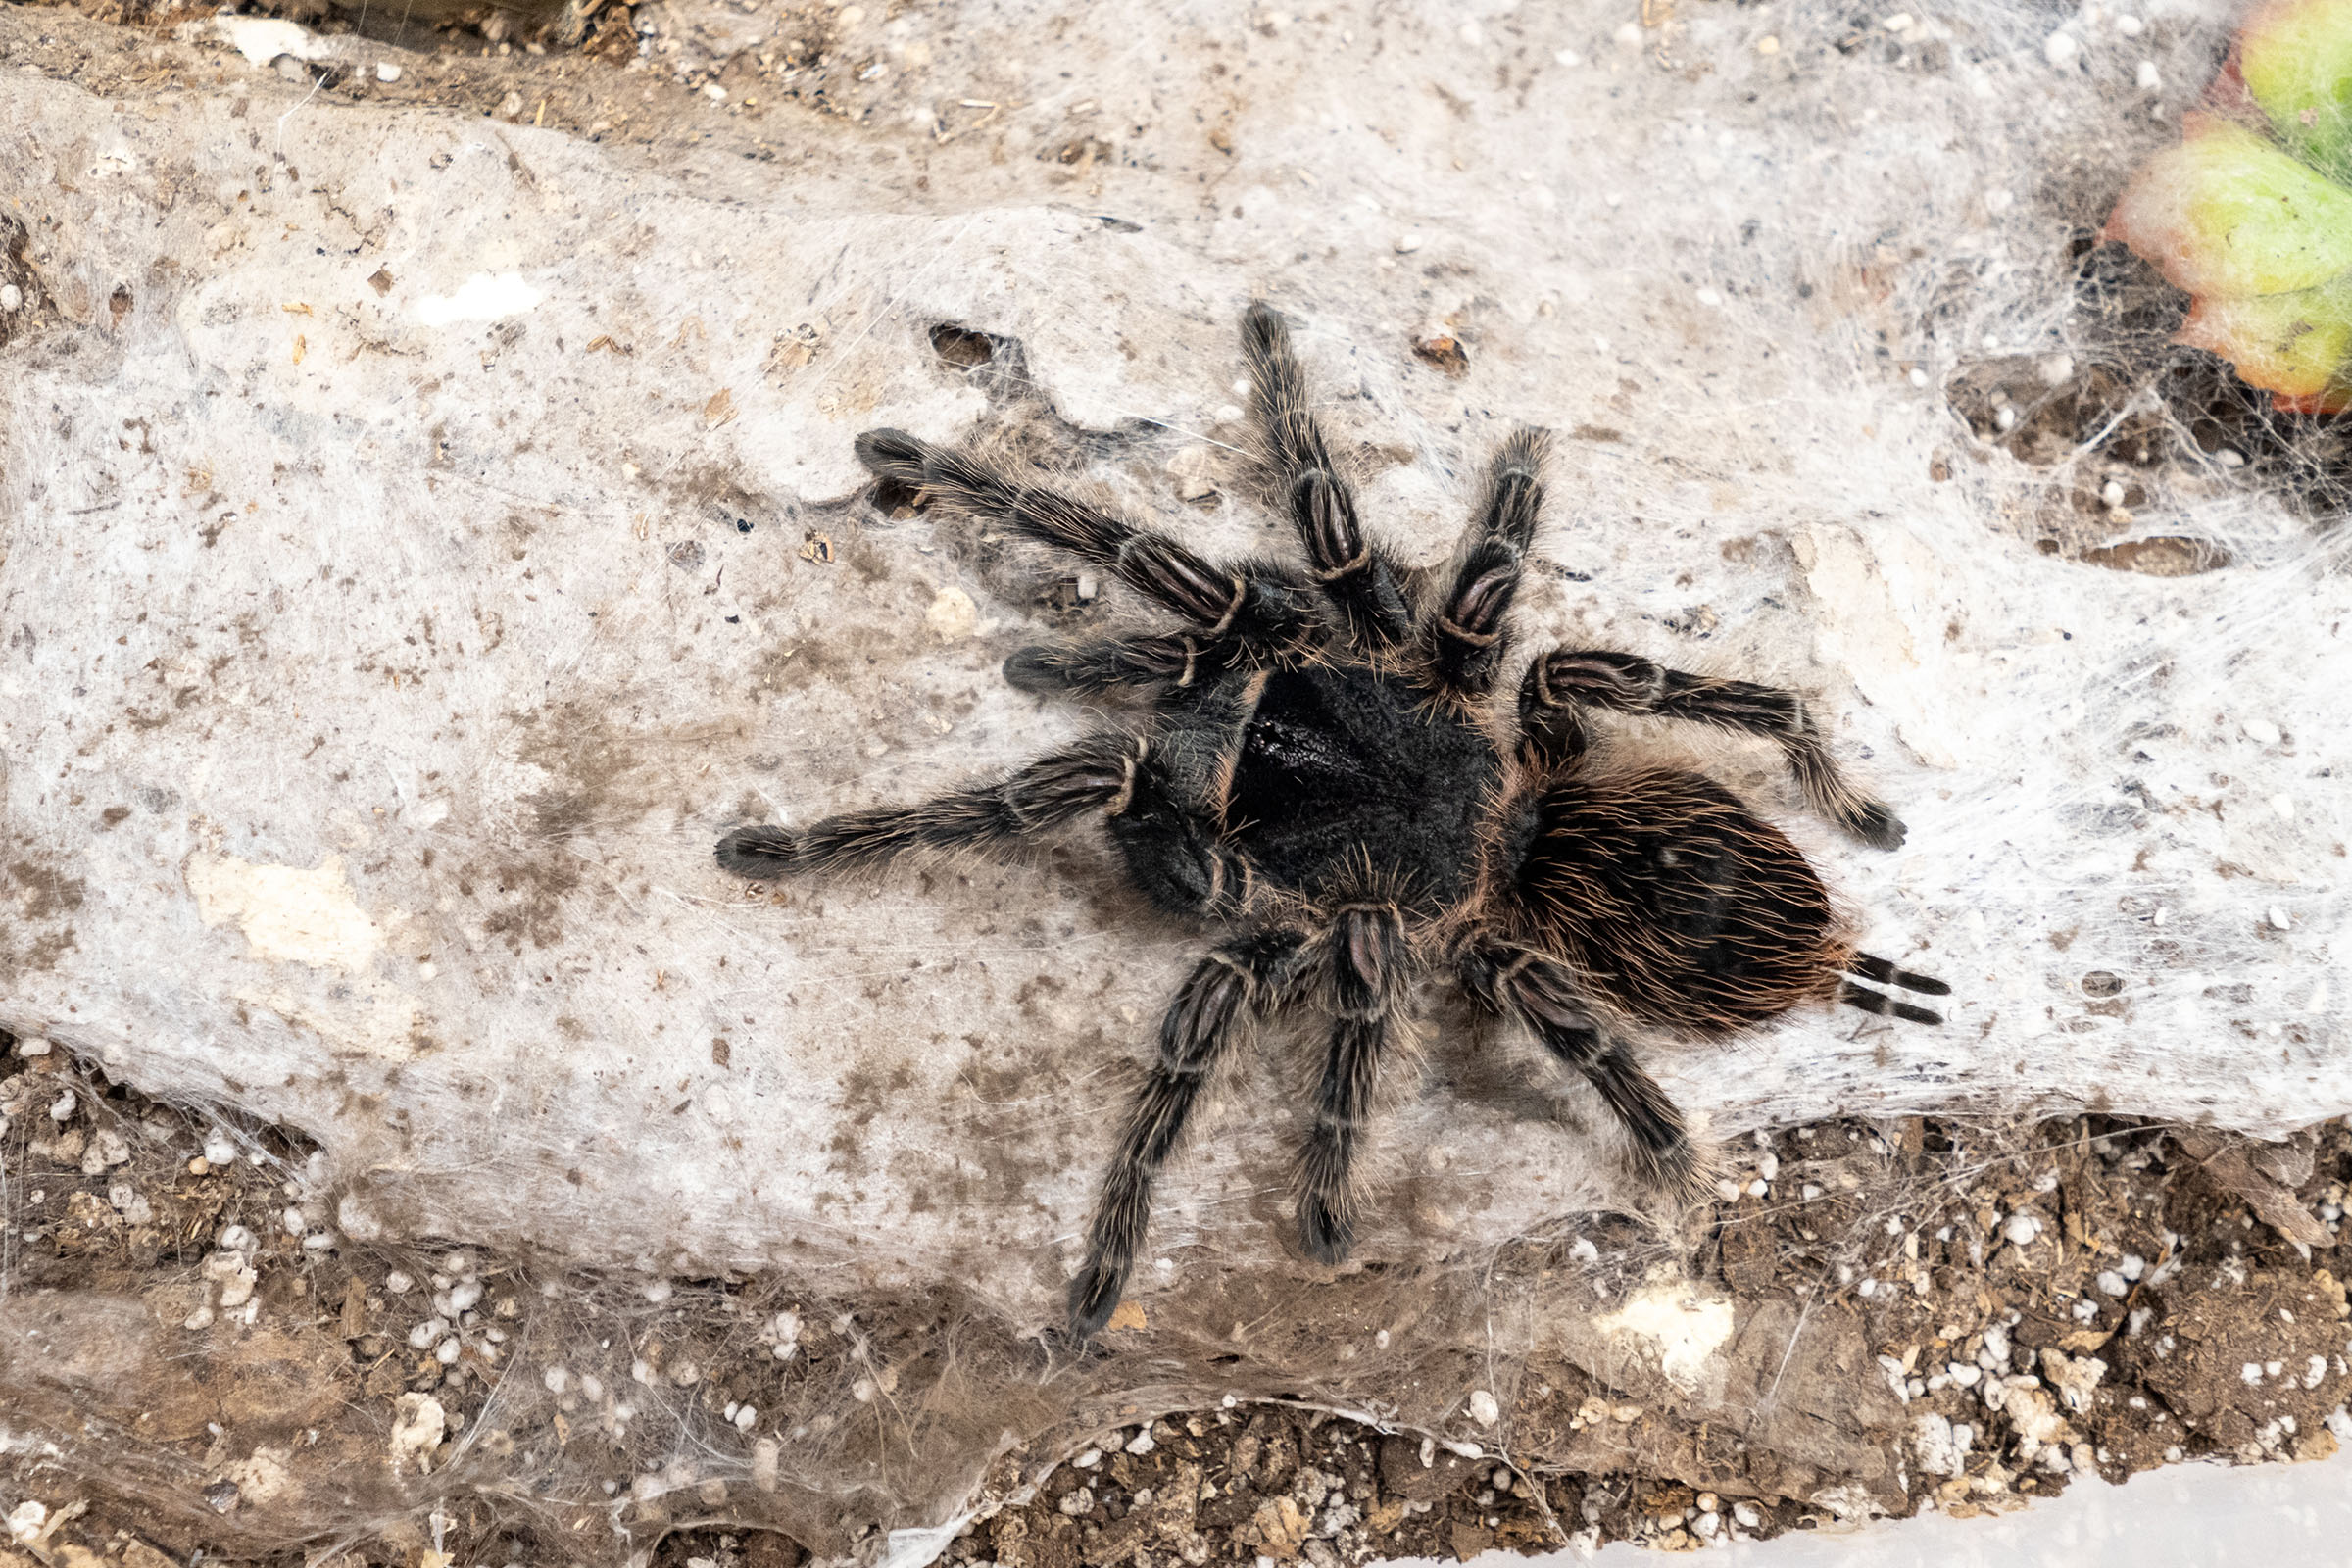 Male tarantulas make themselves known this time of year as they seek a female tarantula during mating season. (Photo by Mitchell Alcala, OSU Agriculture.)